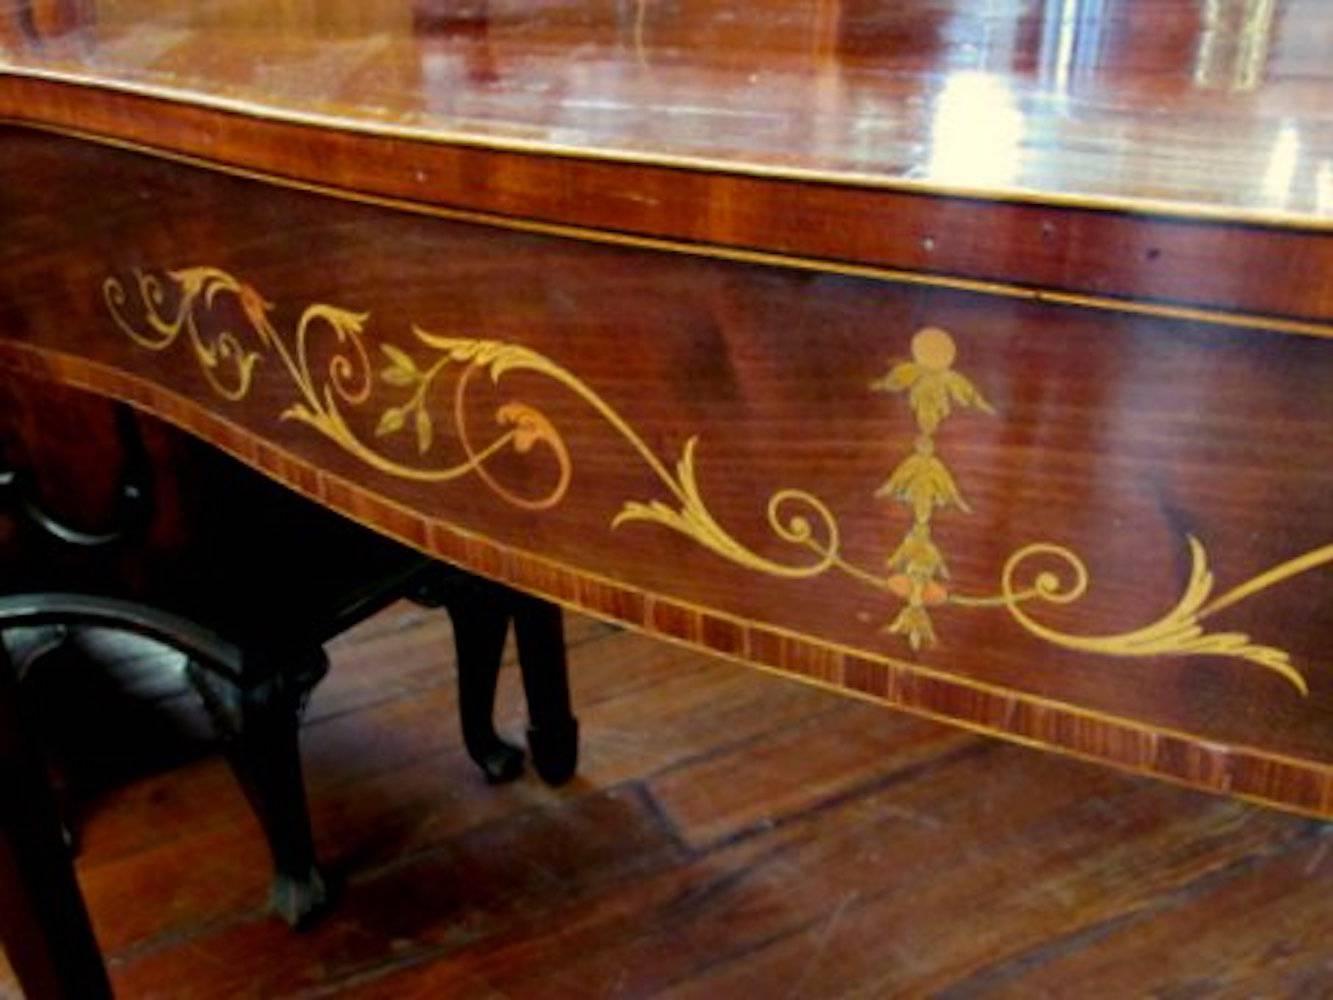 Extremely fine antique English period Geo. III marquetry inlaid figured mahogany Hepplewhite style serpentine console or server with rosewood and satinwood crossbanding.

Please note lovely pierced corner frets and neoclassical marquetry inlay